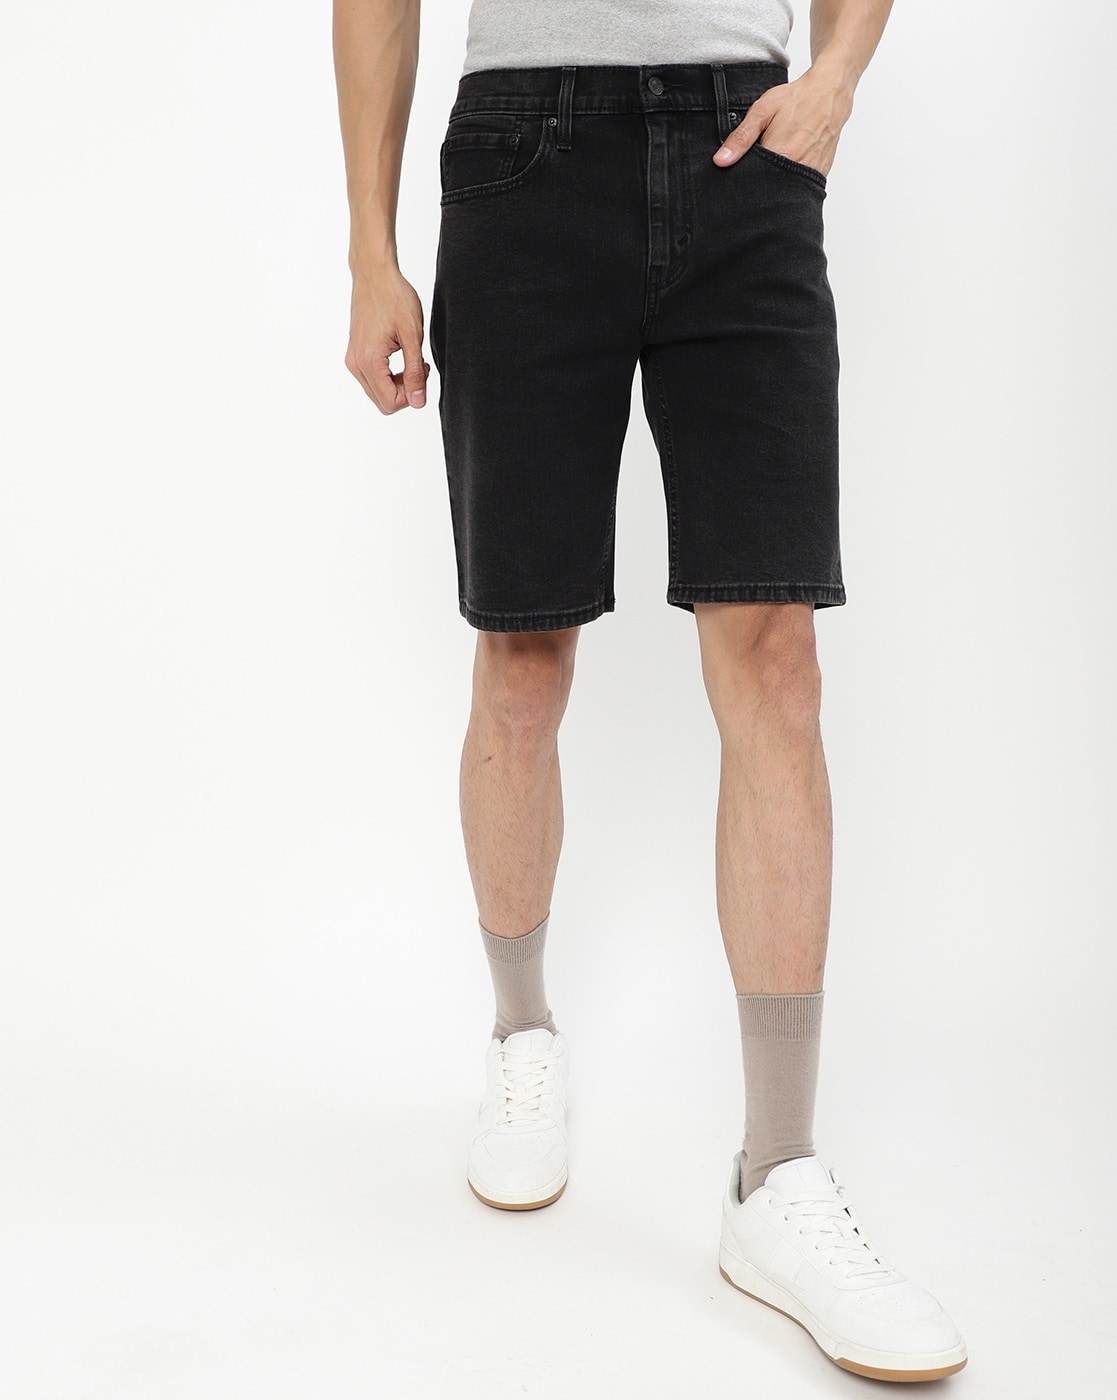 Buy Black Shorts & 3/4ths for Men by LEVIS Online 